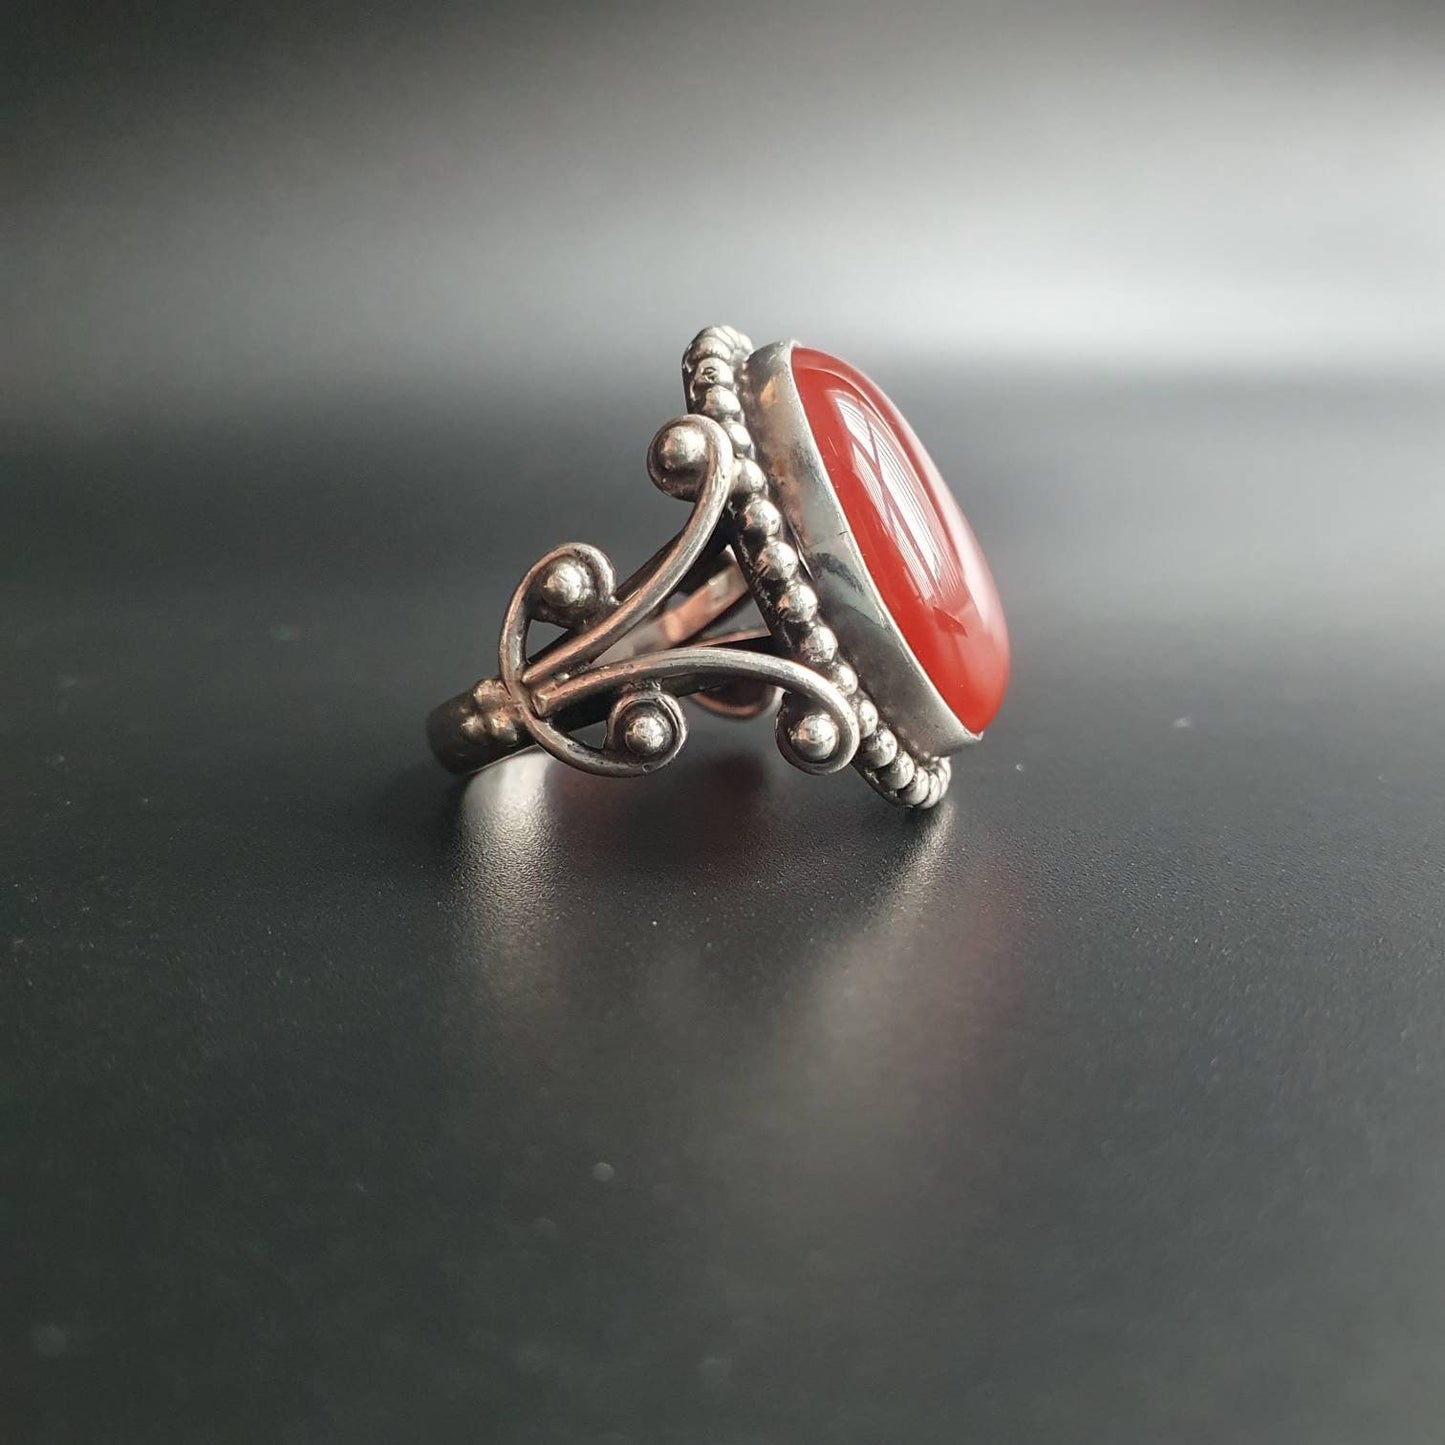 Chunky Ring, Sterling Silver Statement Ring, Carnelian Gemstones, Statement ring, Unisex Gifts jewellery